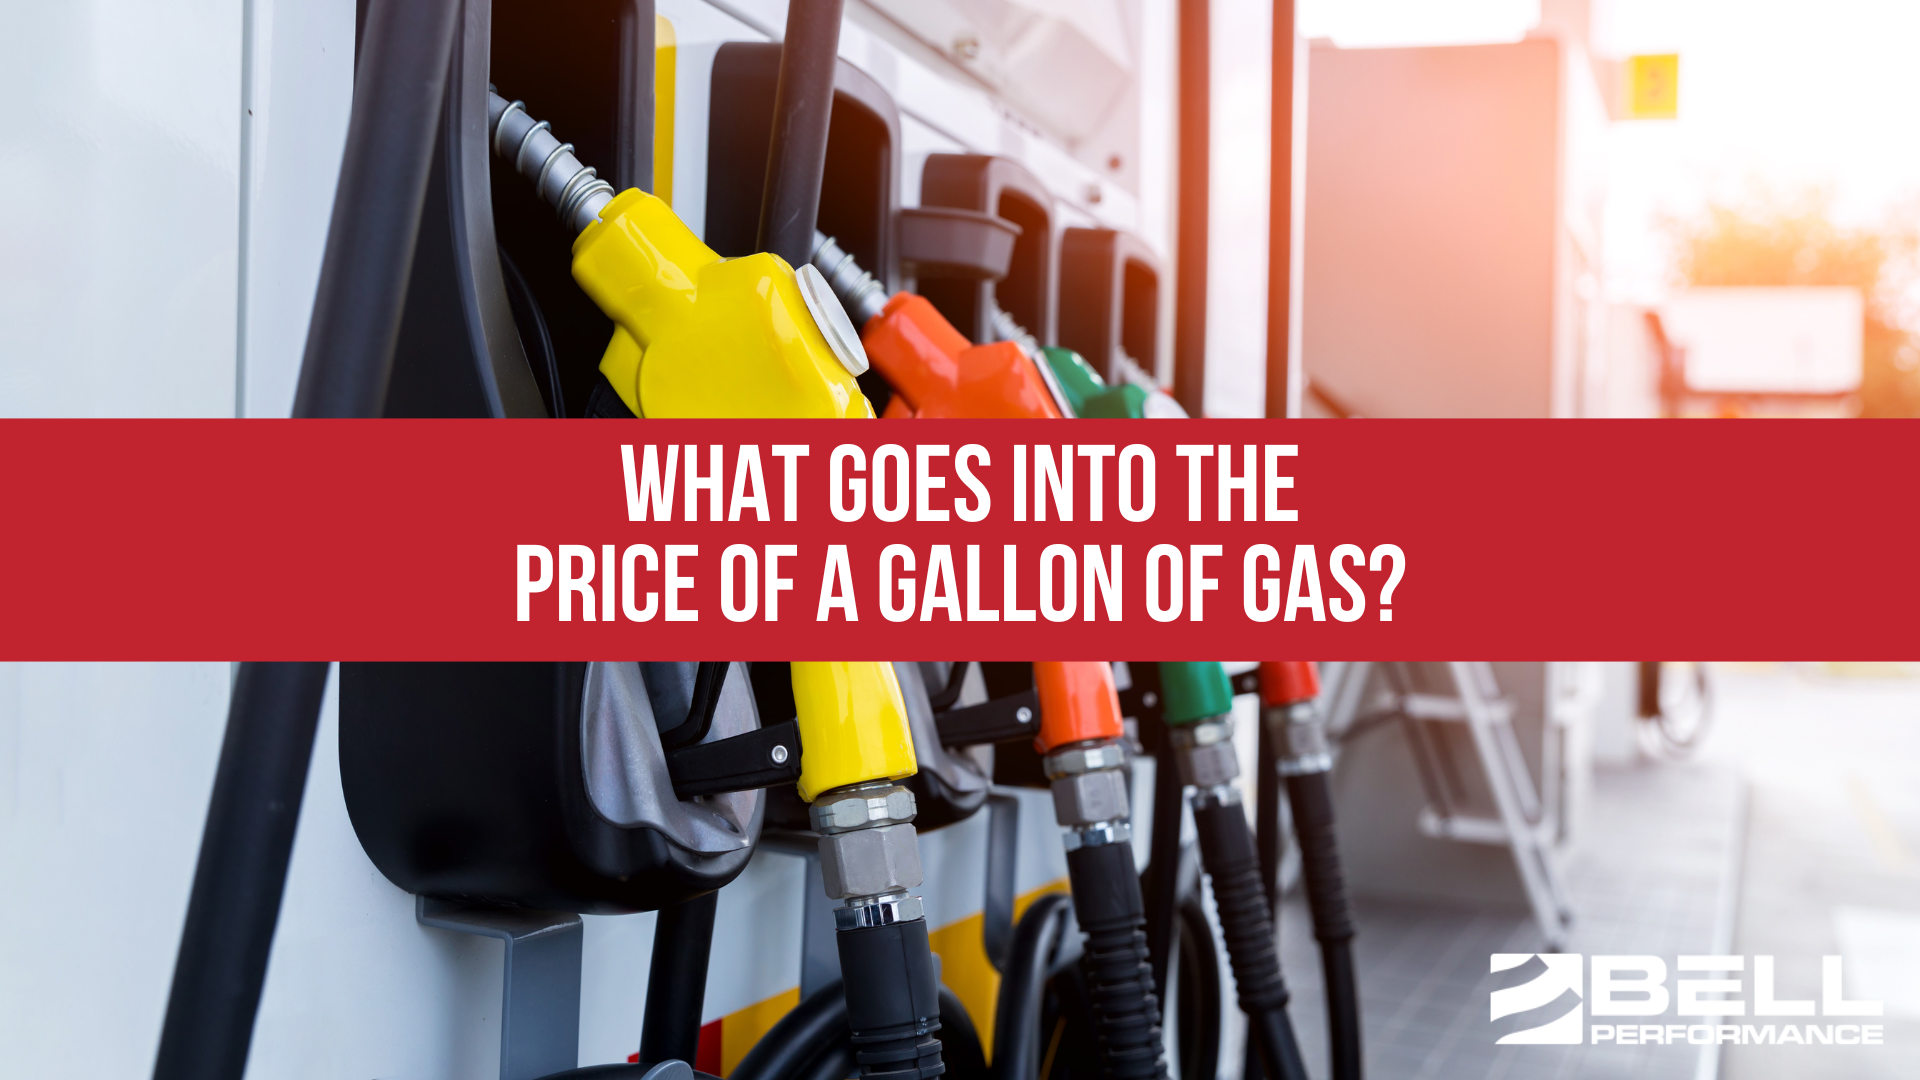 What Goes into the Price of a Gallon of Gas?